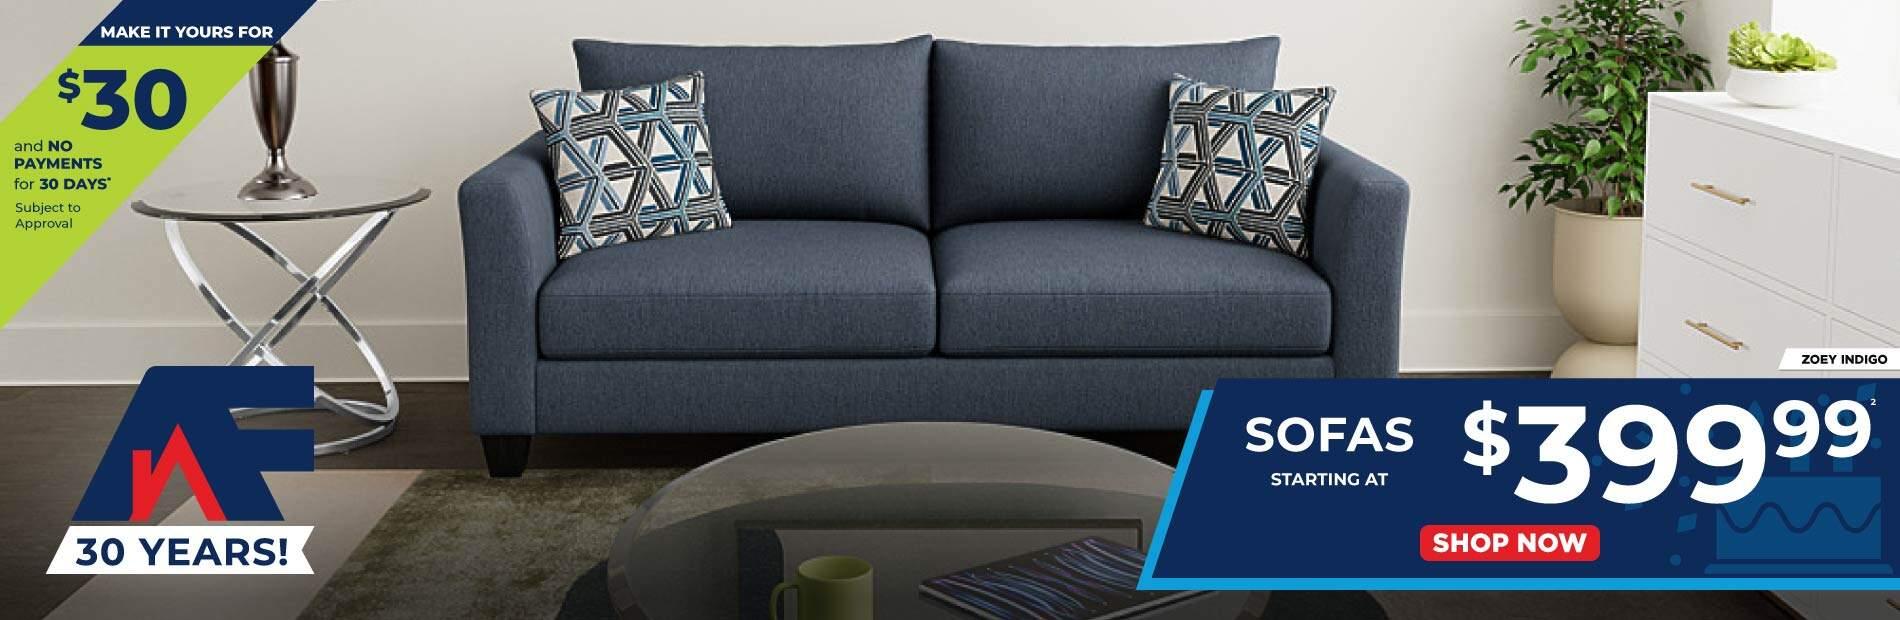 Make it yours $30 and no payments for 30 days subject to approval. 30 Years! Sofas starting at 399.99. Zoey Indigo. Shop now.